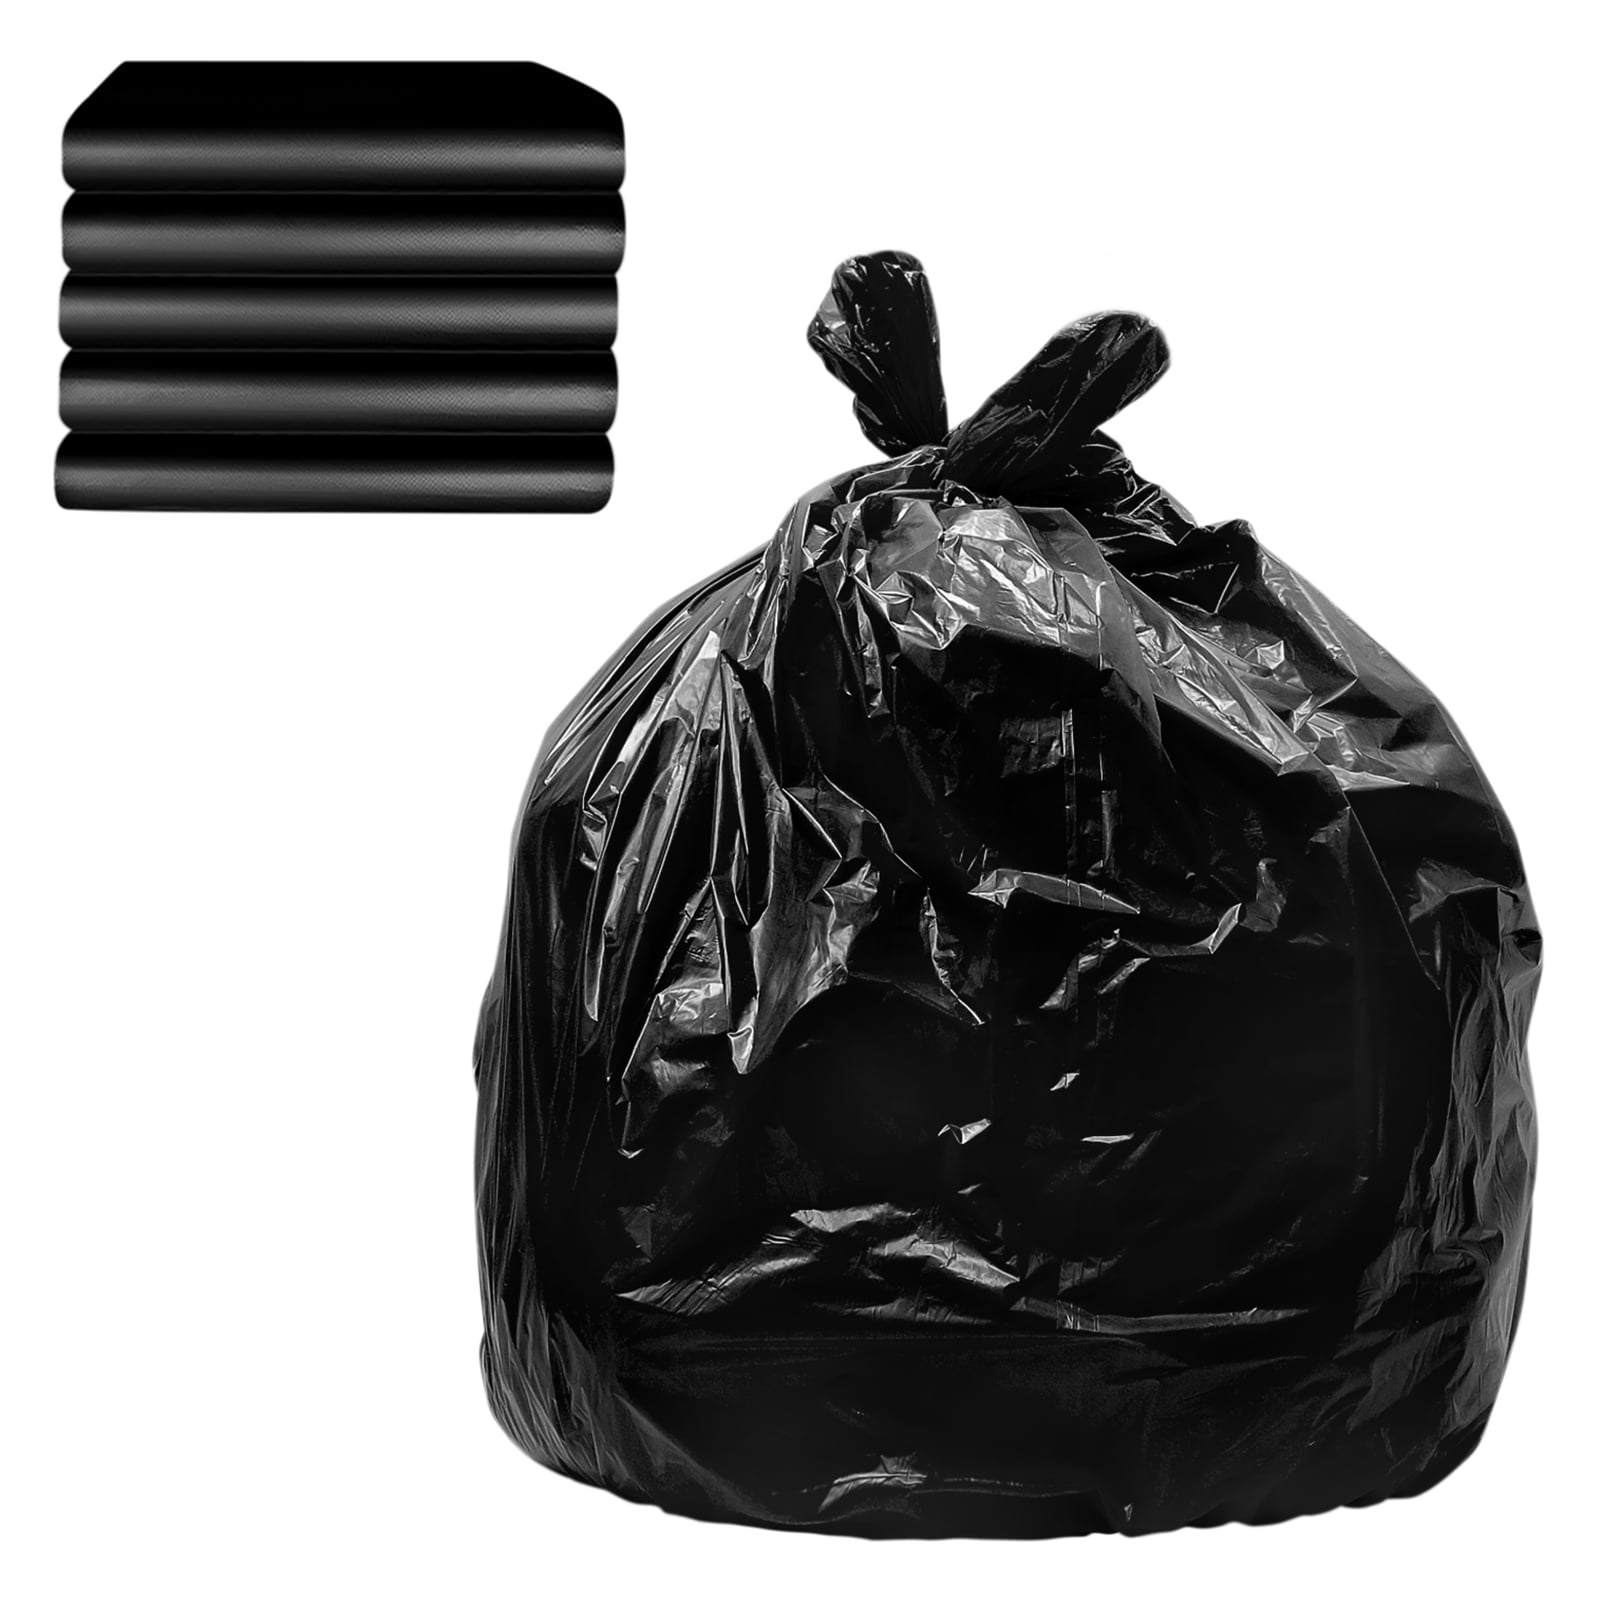 3 Gallon 80 Counts Strong Trash Bags Garbage Bags by Teivio, Bathroom Trash  Can Bin Liners, Plastic Bags for home office kitchen, Black